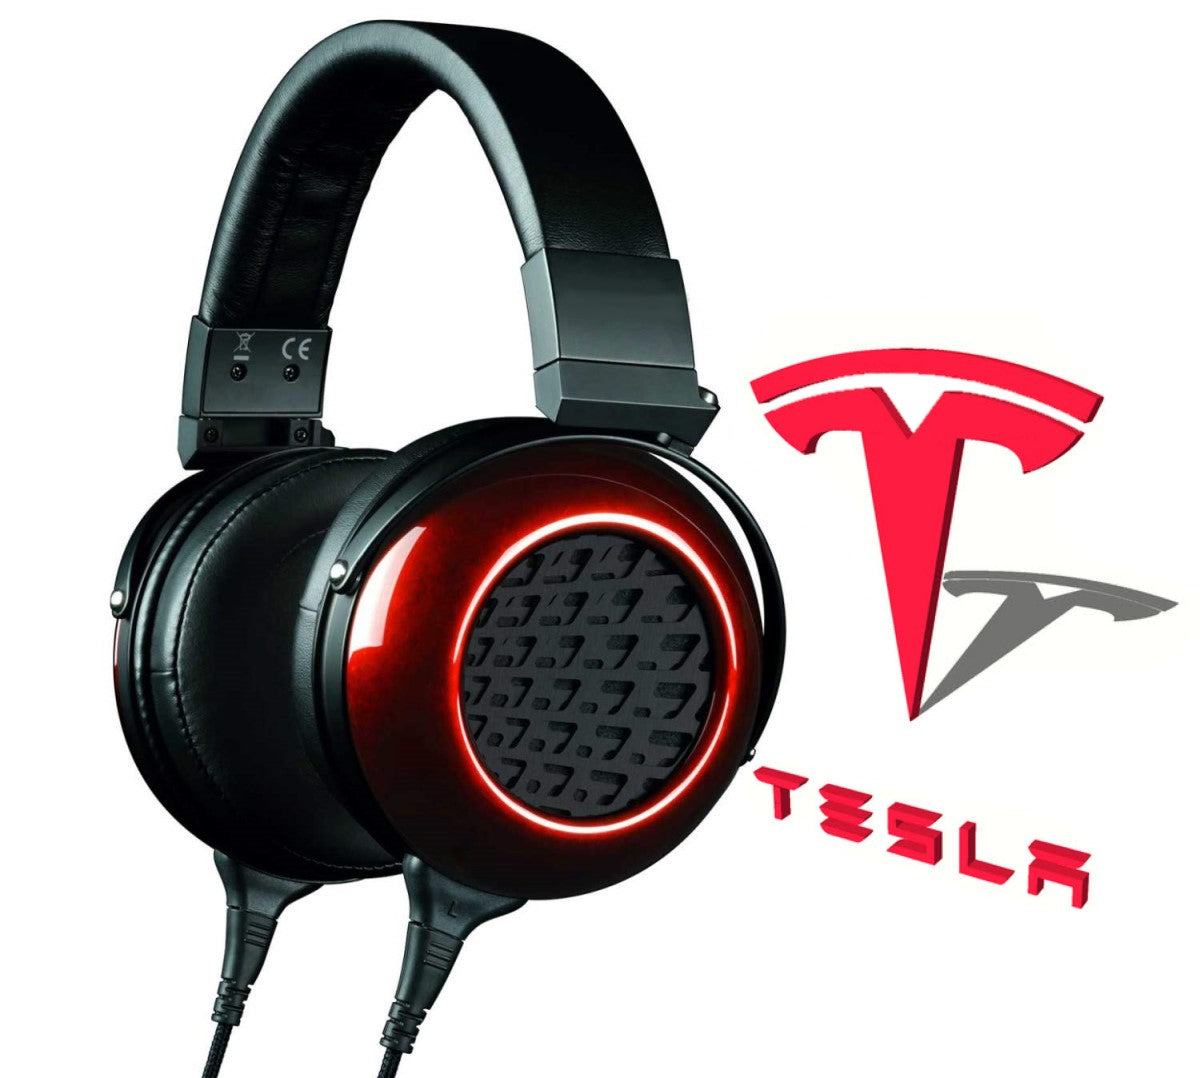 Tesla Files Trademark for its Own Audio Equipment, Showing Significant Product Expansion